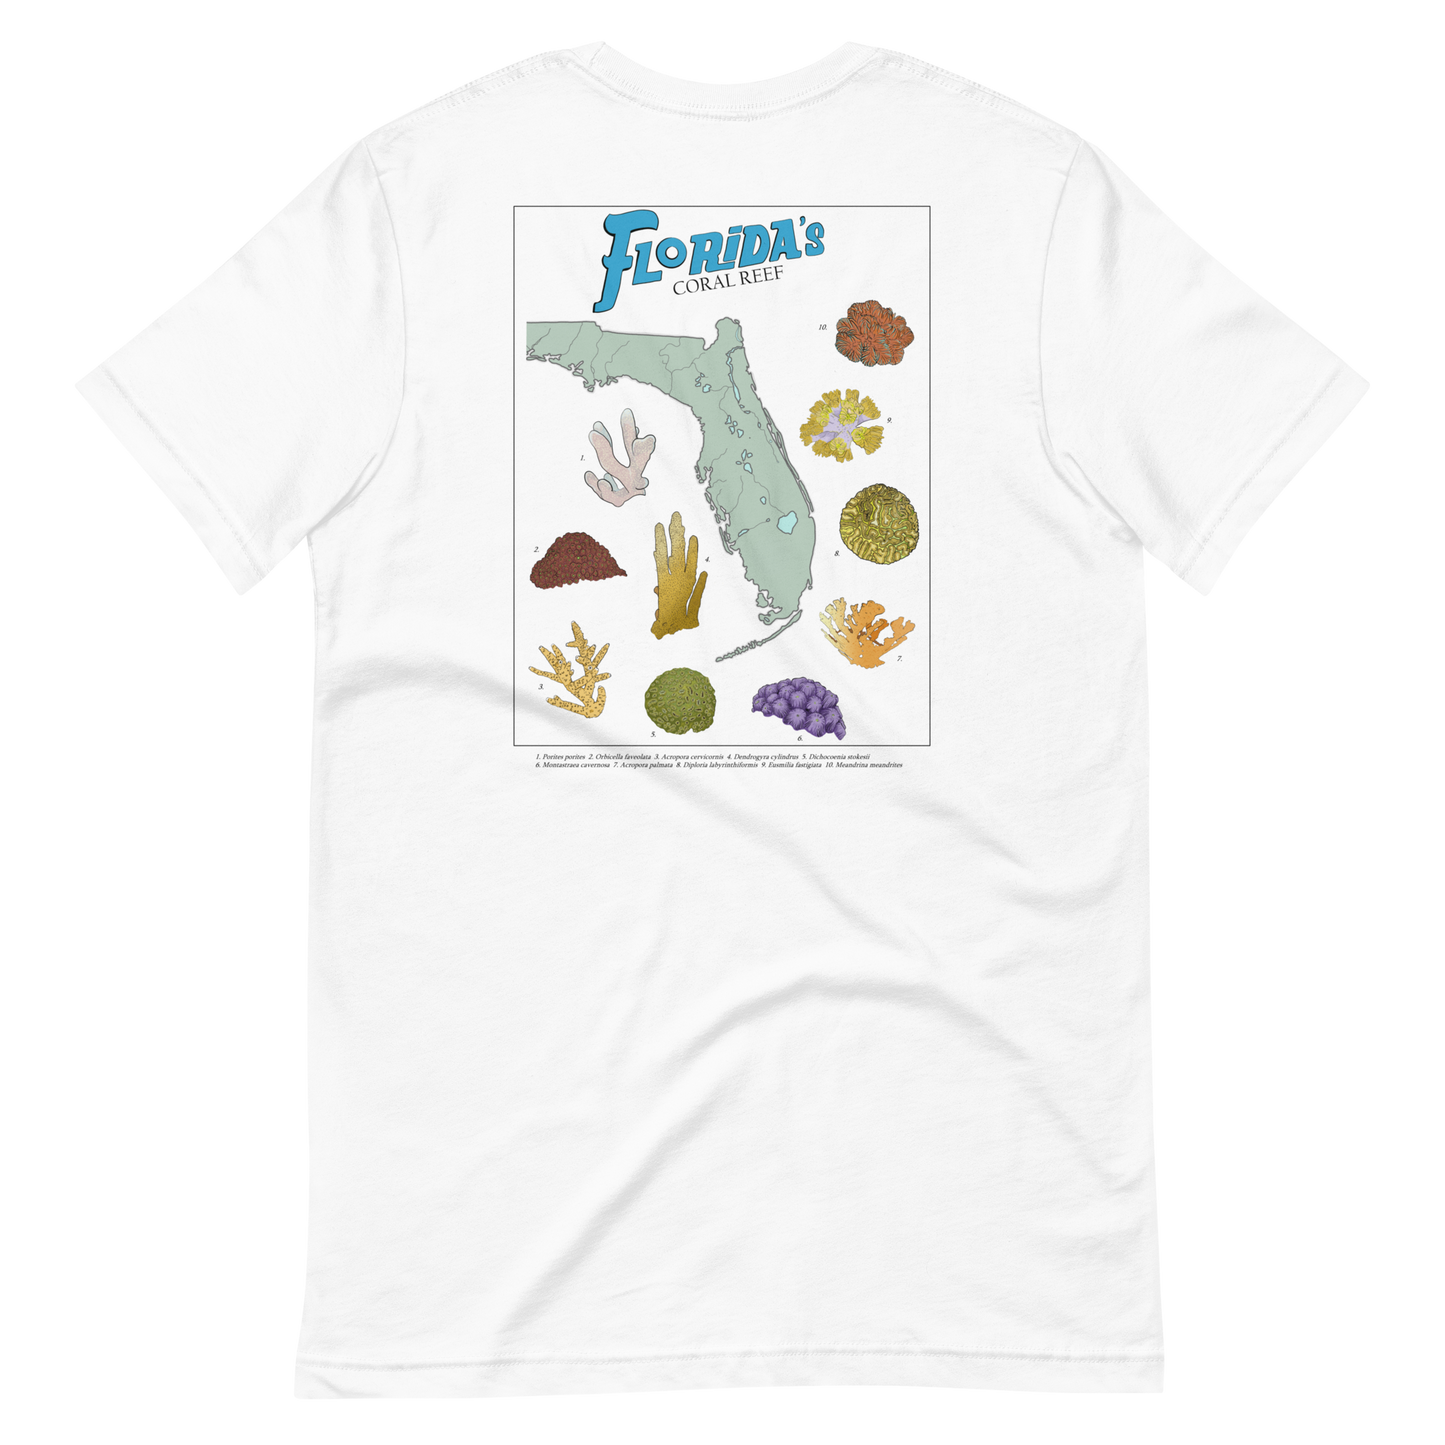 Florida's Coral Reef T-Shirt (front & back print)